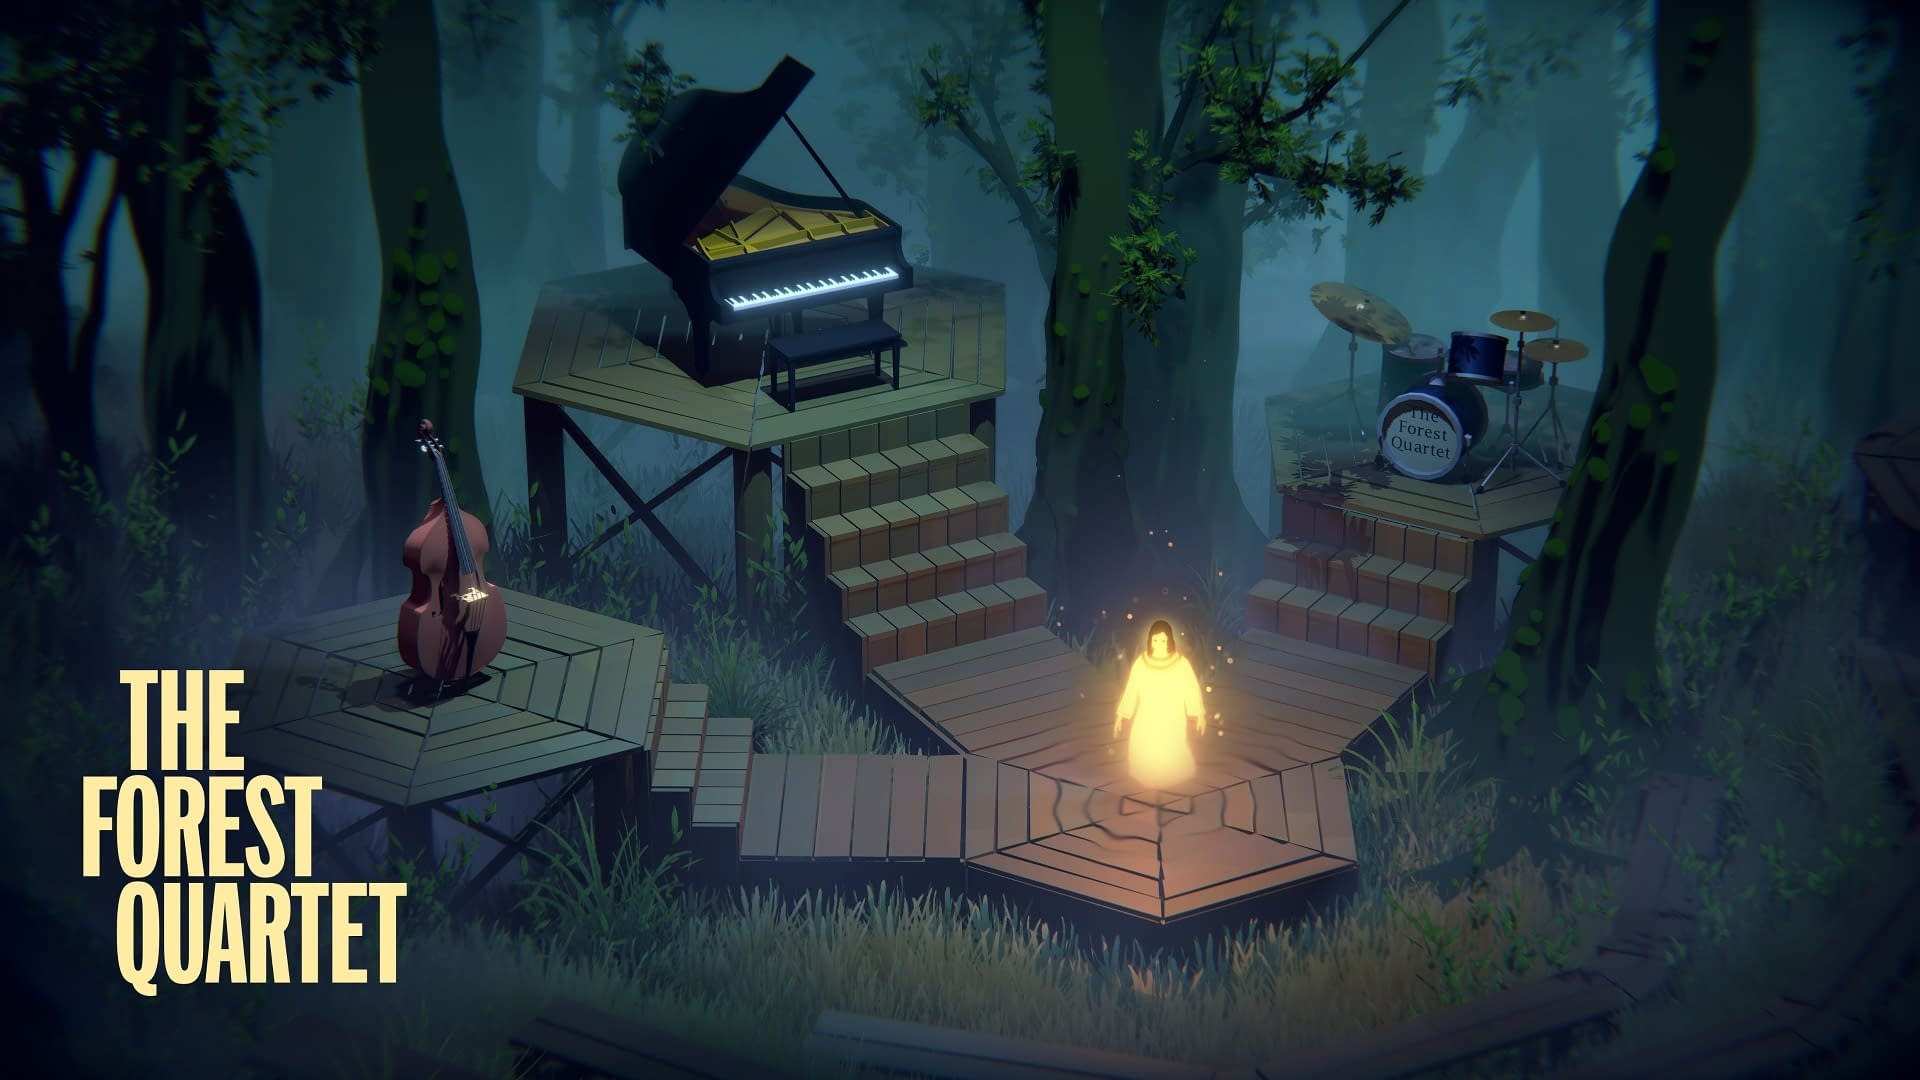 The Forest Quartet Switch comes to the Console: Date Announced